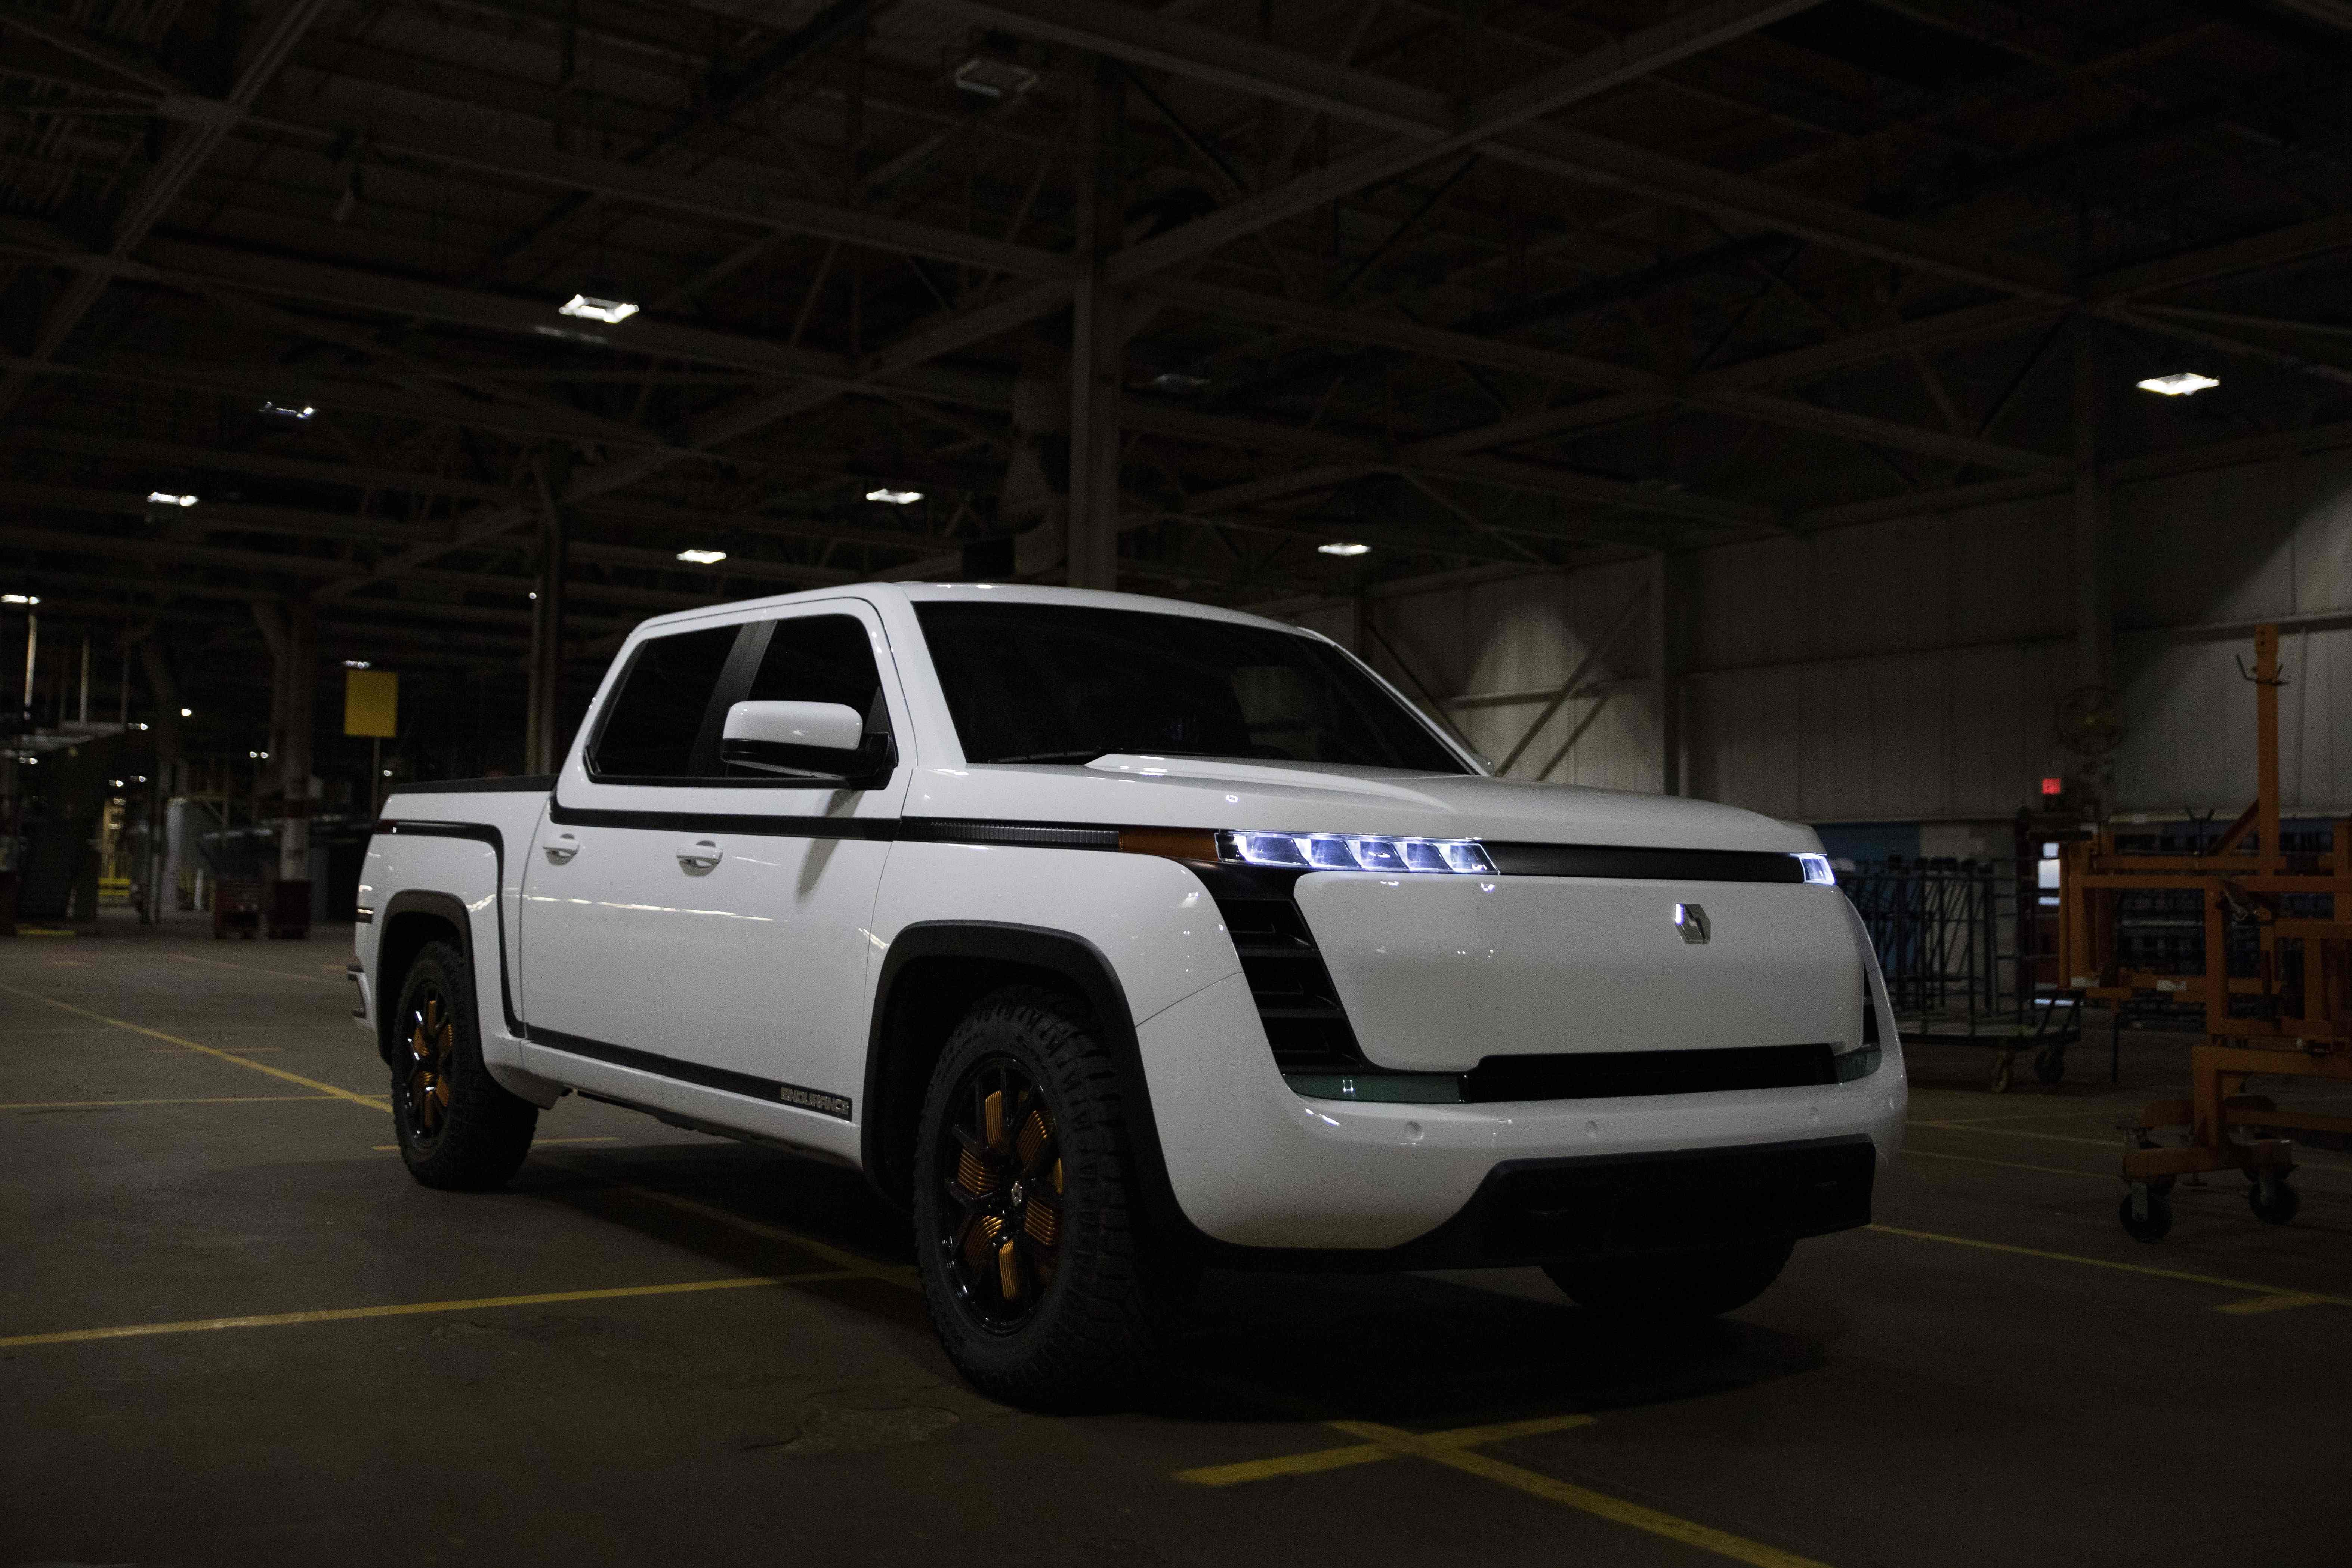 Lordstown Motors, unveils their new electric pickup truck “Endurance” in Lordstown, Ohio, on October 15, 2020. The old GM factory has been acquired by Lordstown Motors, an electric truck startup. - Workers at the General Motors factory in Lordstown, Ohio, listened when US President Donald Trump said companies would soon be booming. But two years after that 2017 speech, the plant closed. GM's shuttering of the factory was a blow to the Mahoning Valley region of the swing state crucial to the November 3 presidential election, which has dealt with a declining manufacturing industry for decades and, like all parts of the US, is now menaced by the coronavirus. Credit: AFP Photo